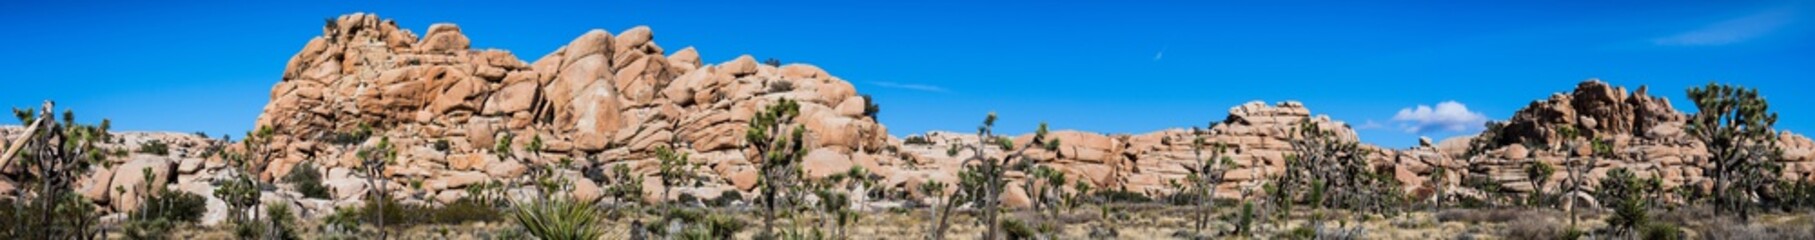 Panoramic view of a rocky ridge in Joshua Tree National Park, south California